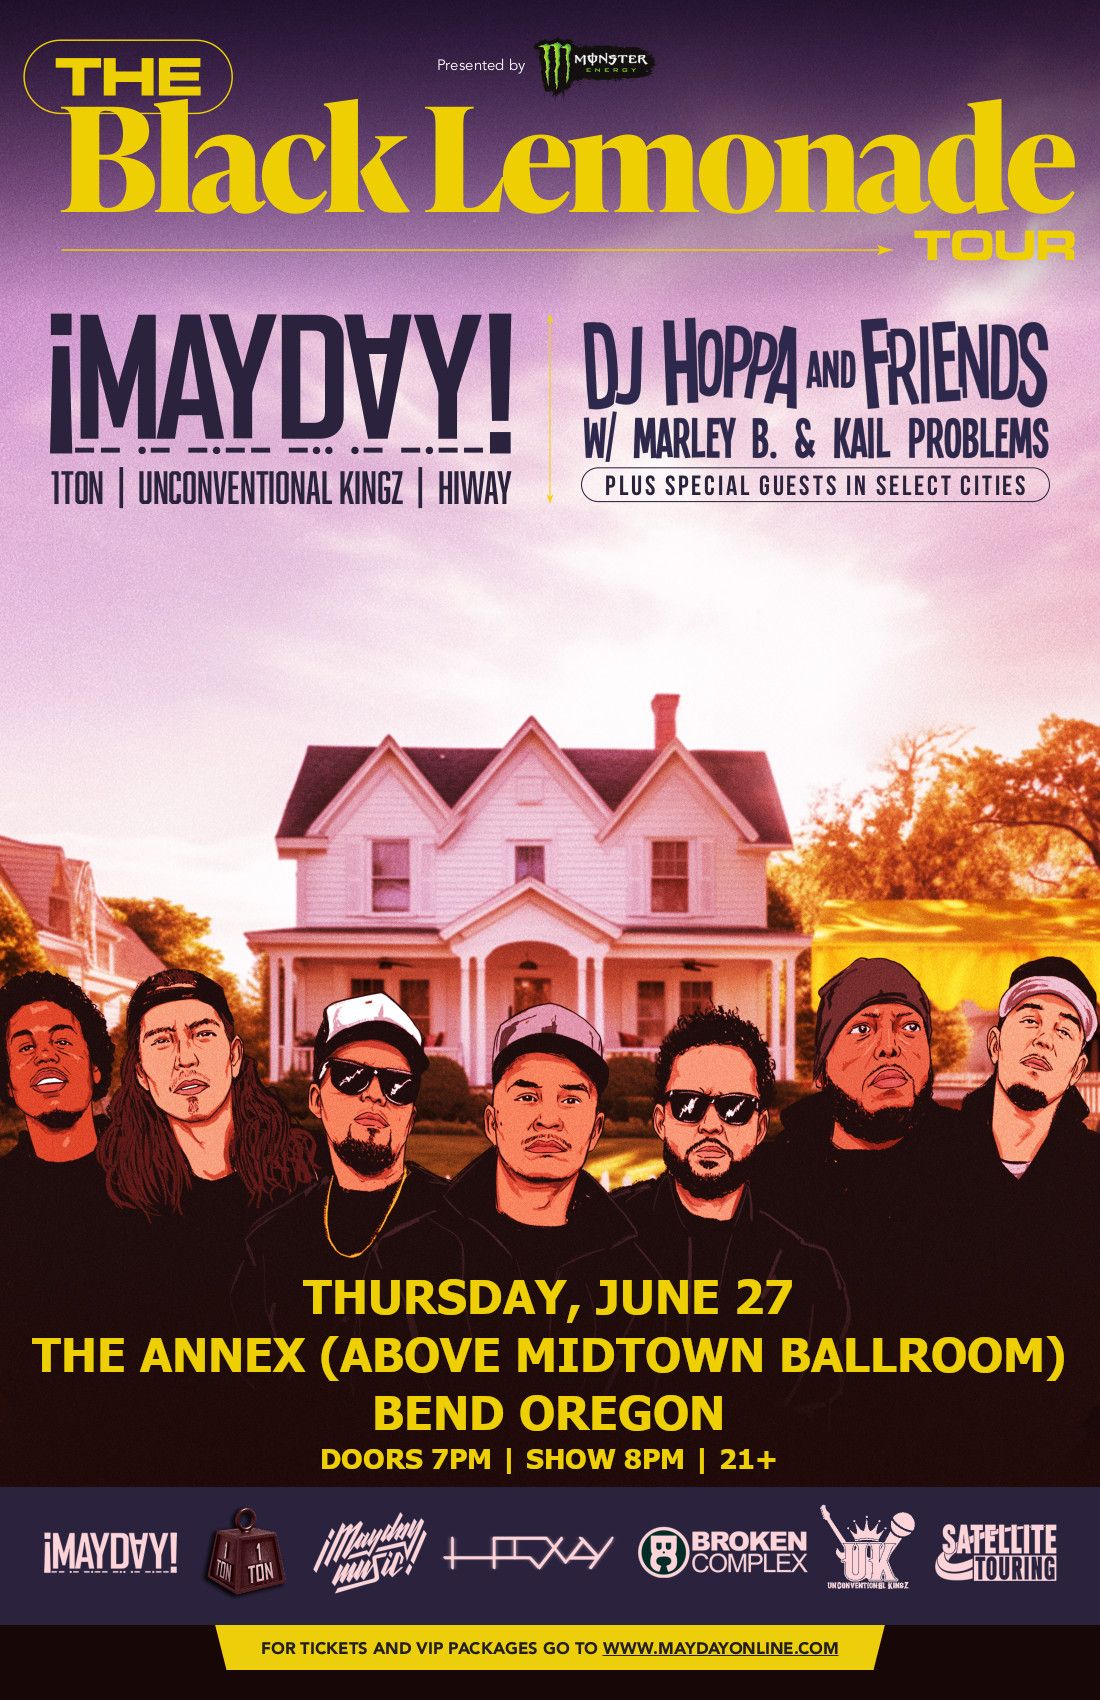 Mayday, 1Ton, Unconventional Kings, Hiway, DJ Hoppa at The Annex above Midtown Ballroom